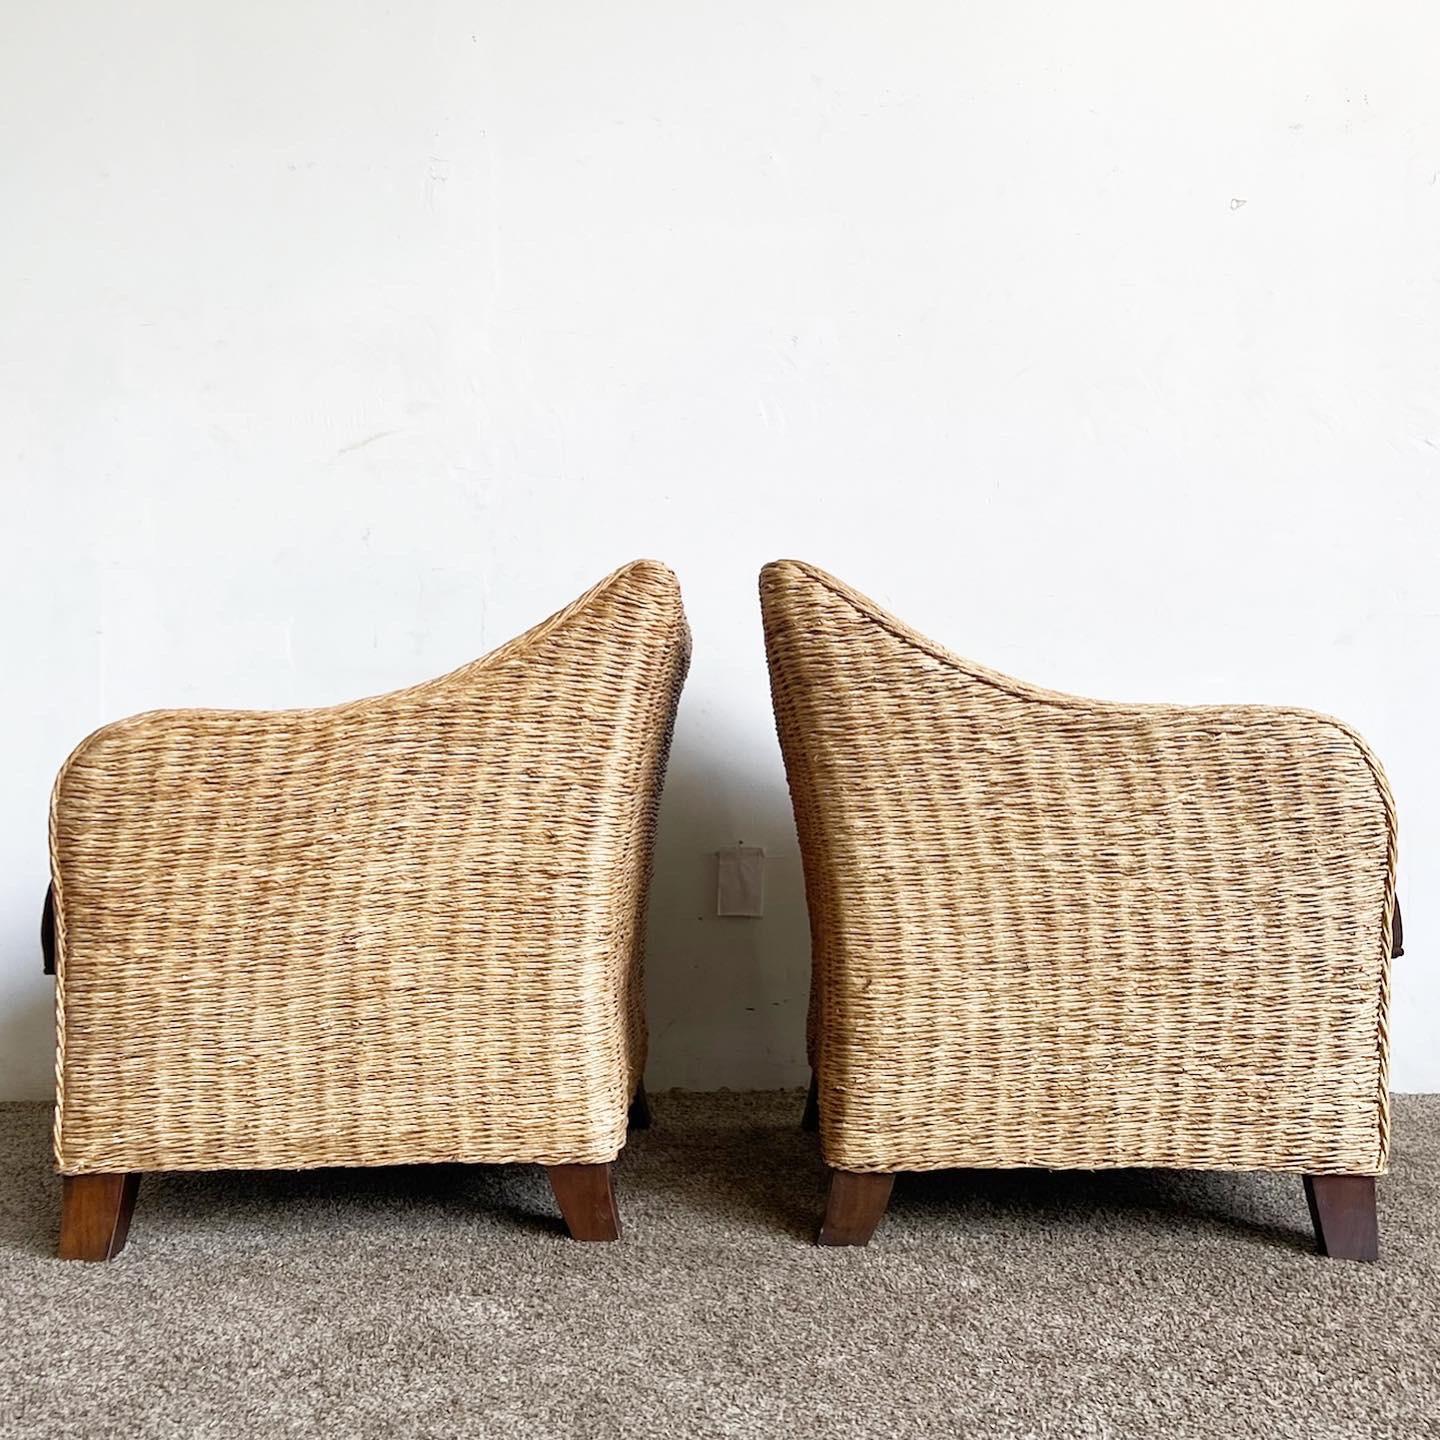 Indonesian Boho Chic Wicker Arm Chairs With Brown Cushions For Sale